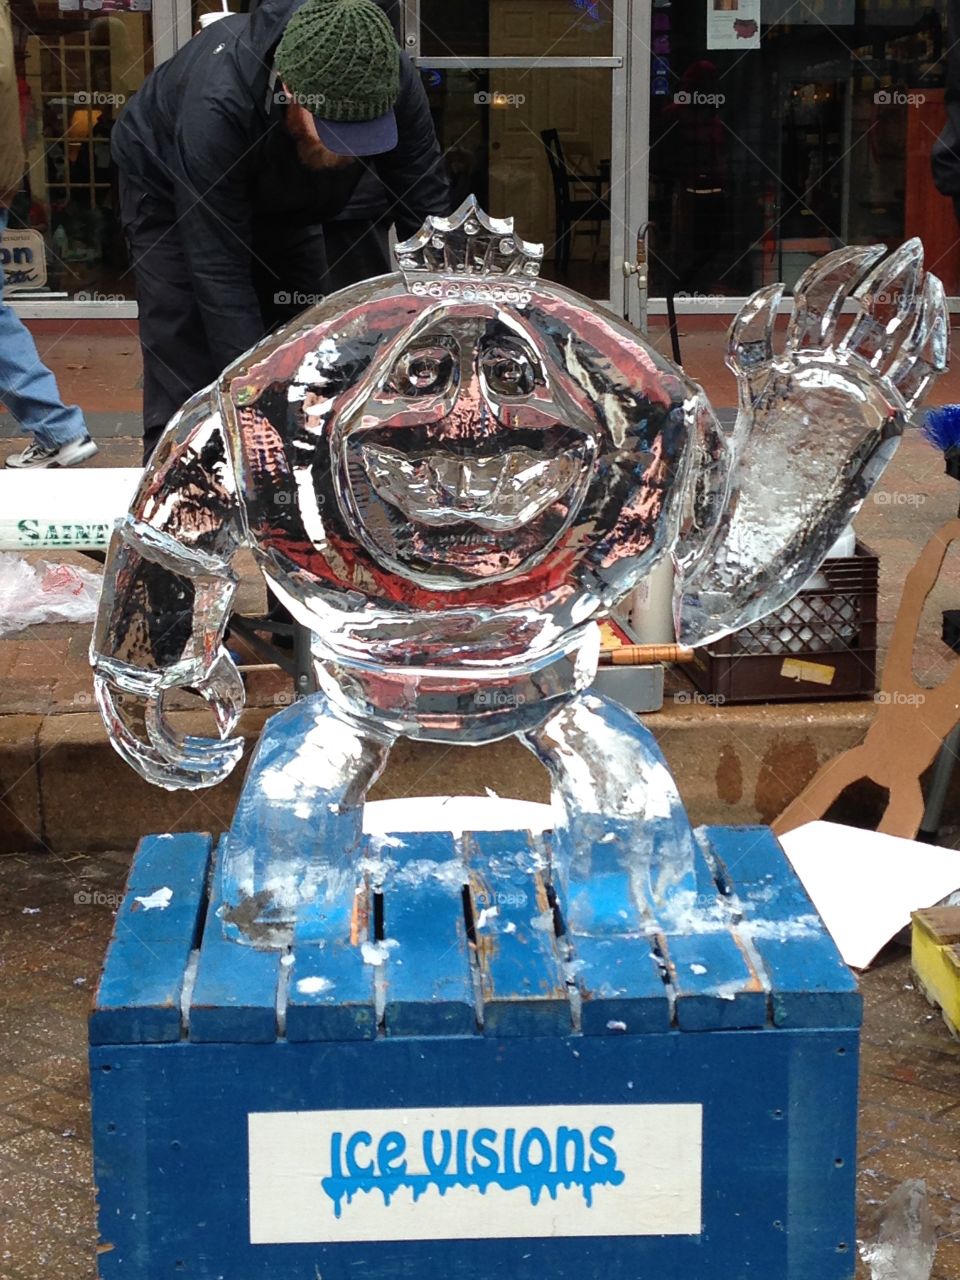 Ice carving contest in St. Charles, IL